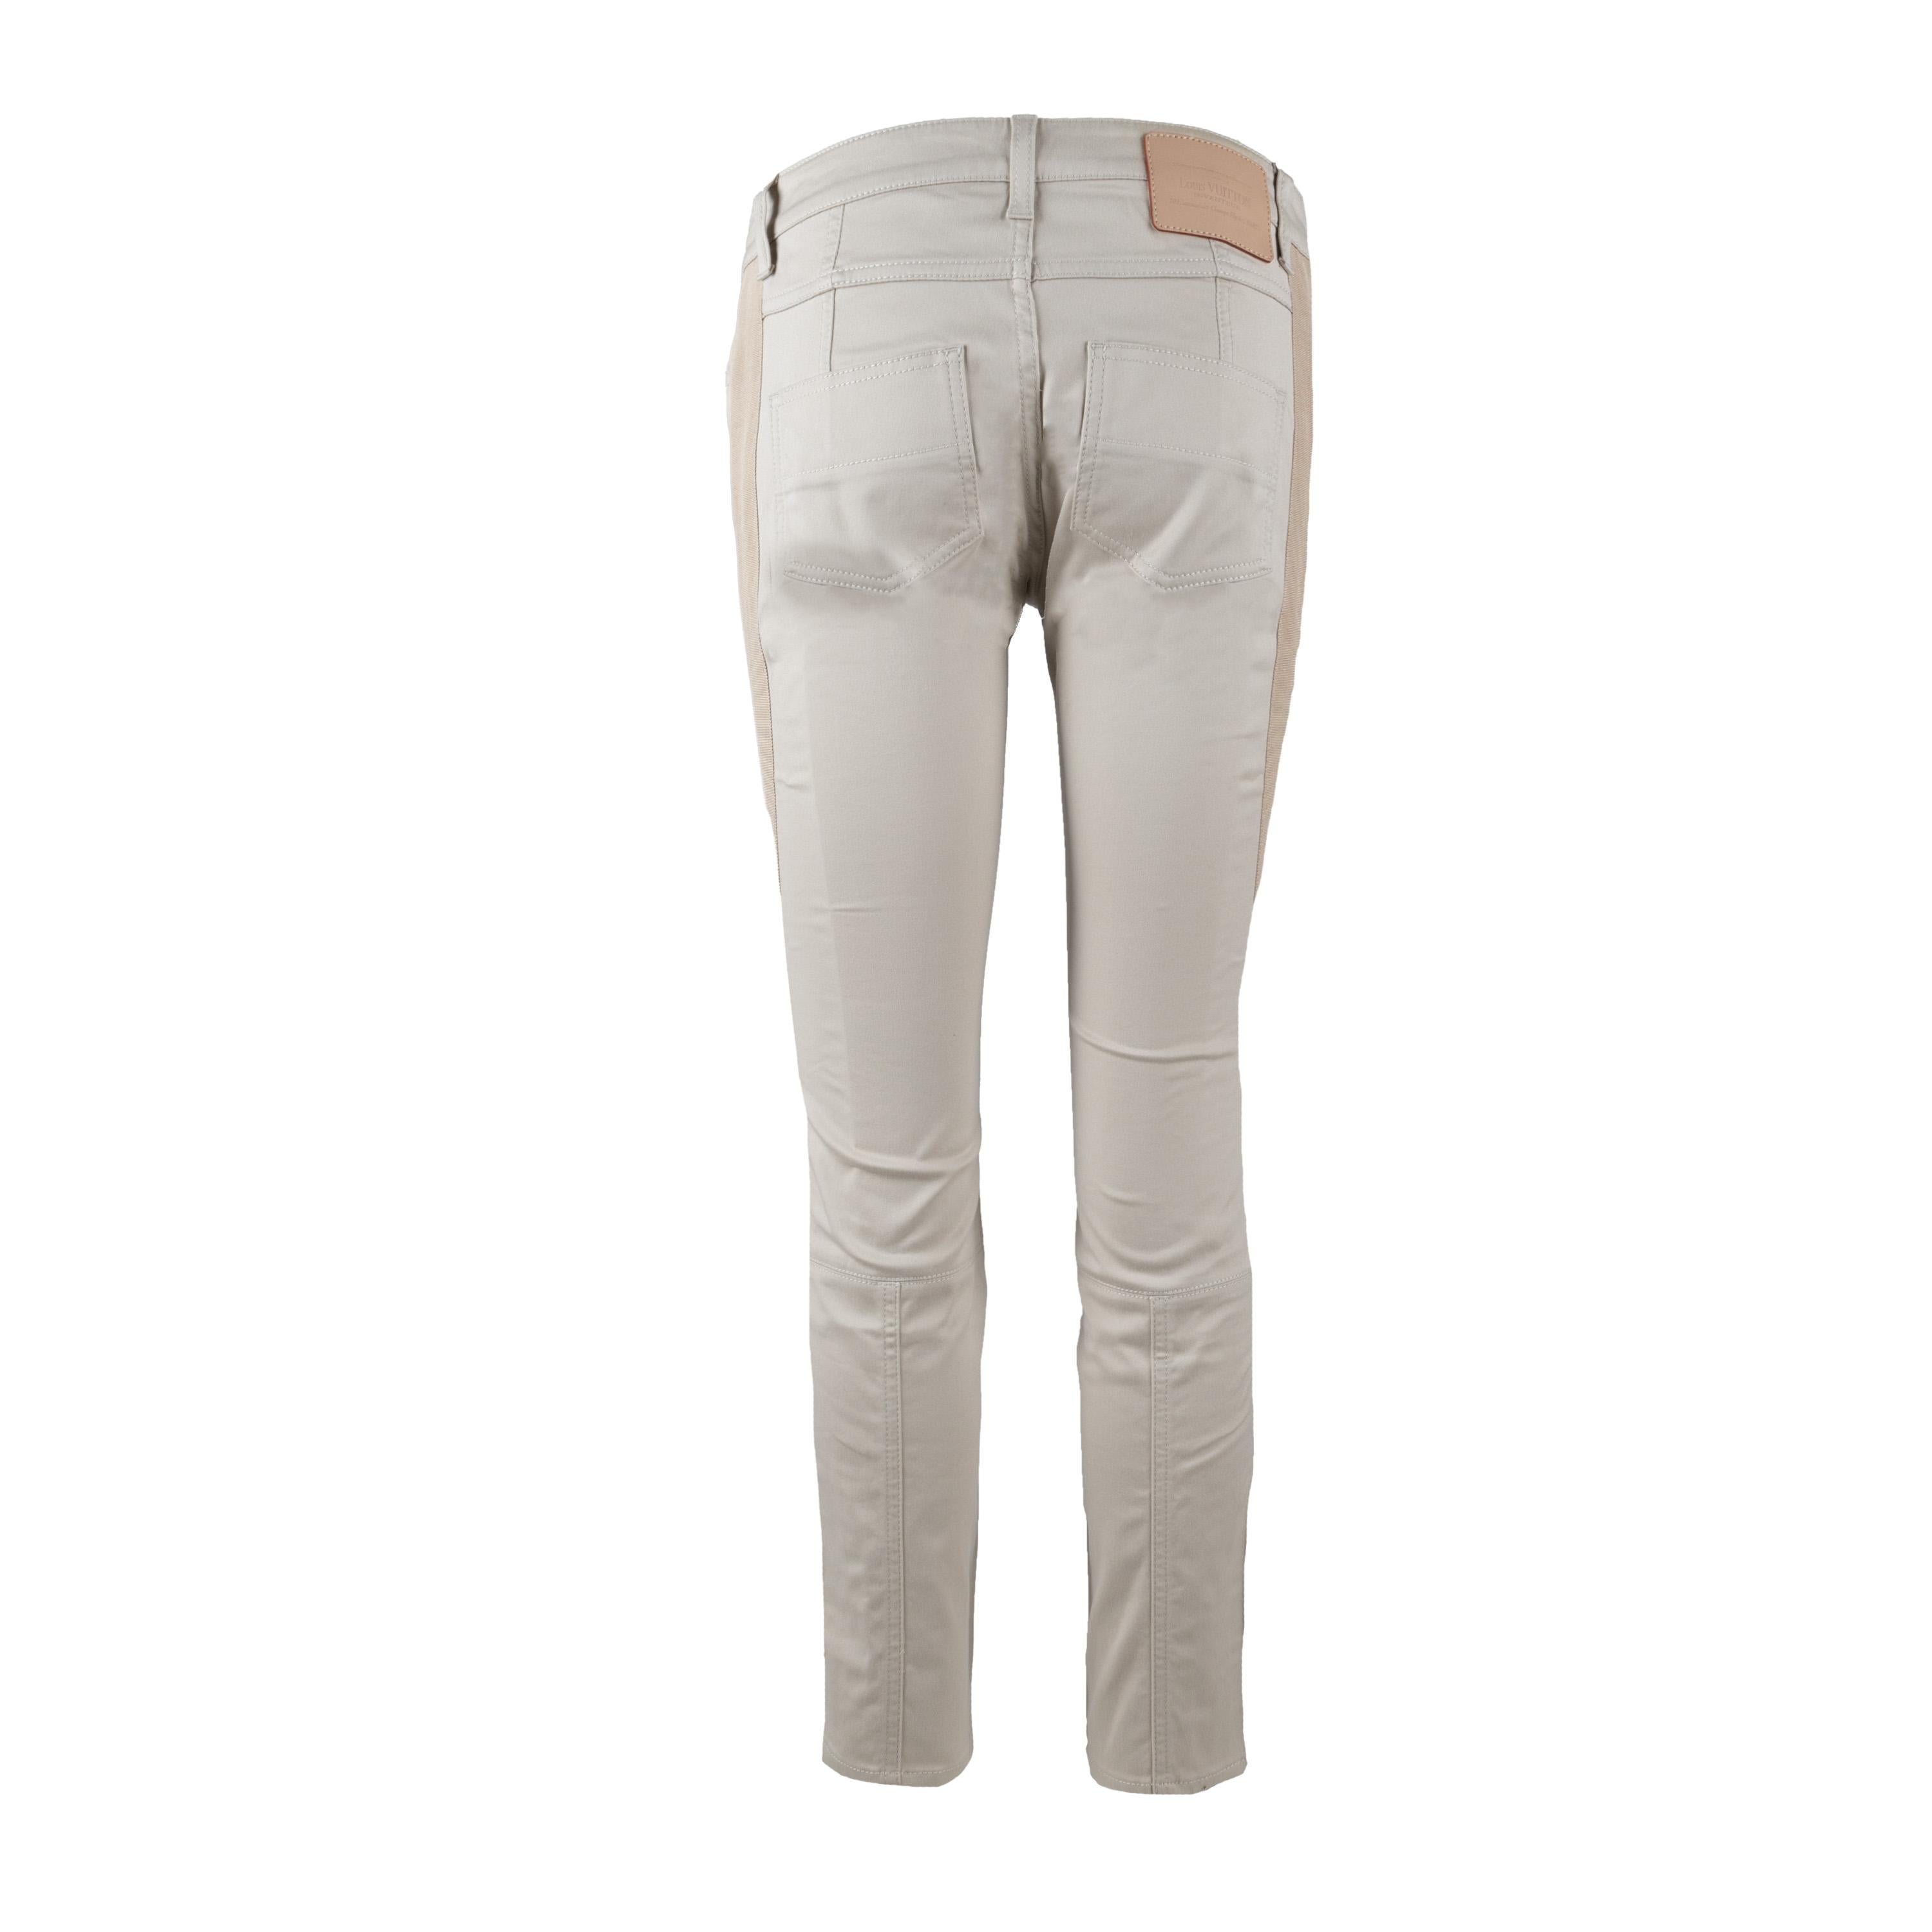 The Louis Vuitton jeans consists of a beige panel on both sides of the pant with branded flair being highlighted by the Louis Vuitton Paris engraved on the buttons and the leather patch stitched on the back embossed with the brand logo. Offering